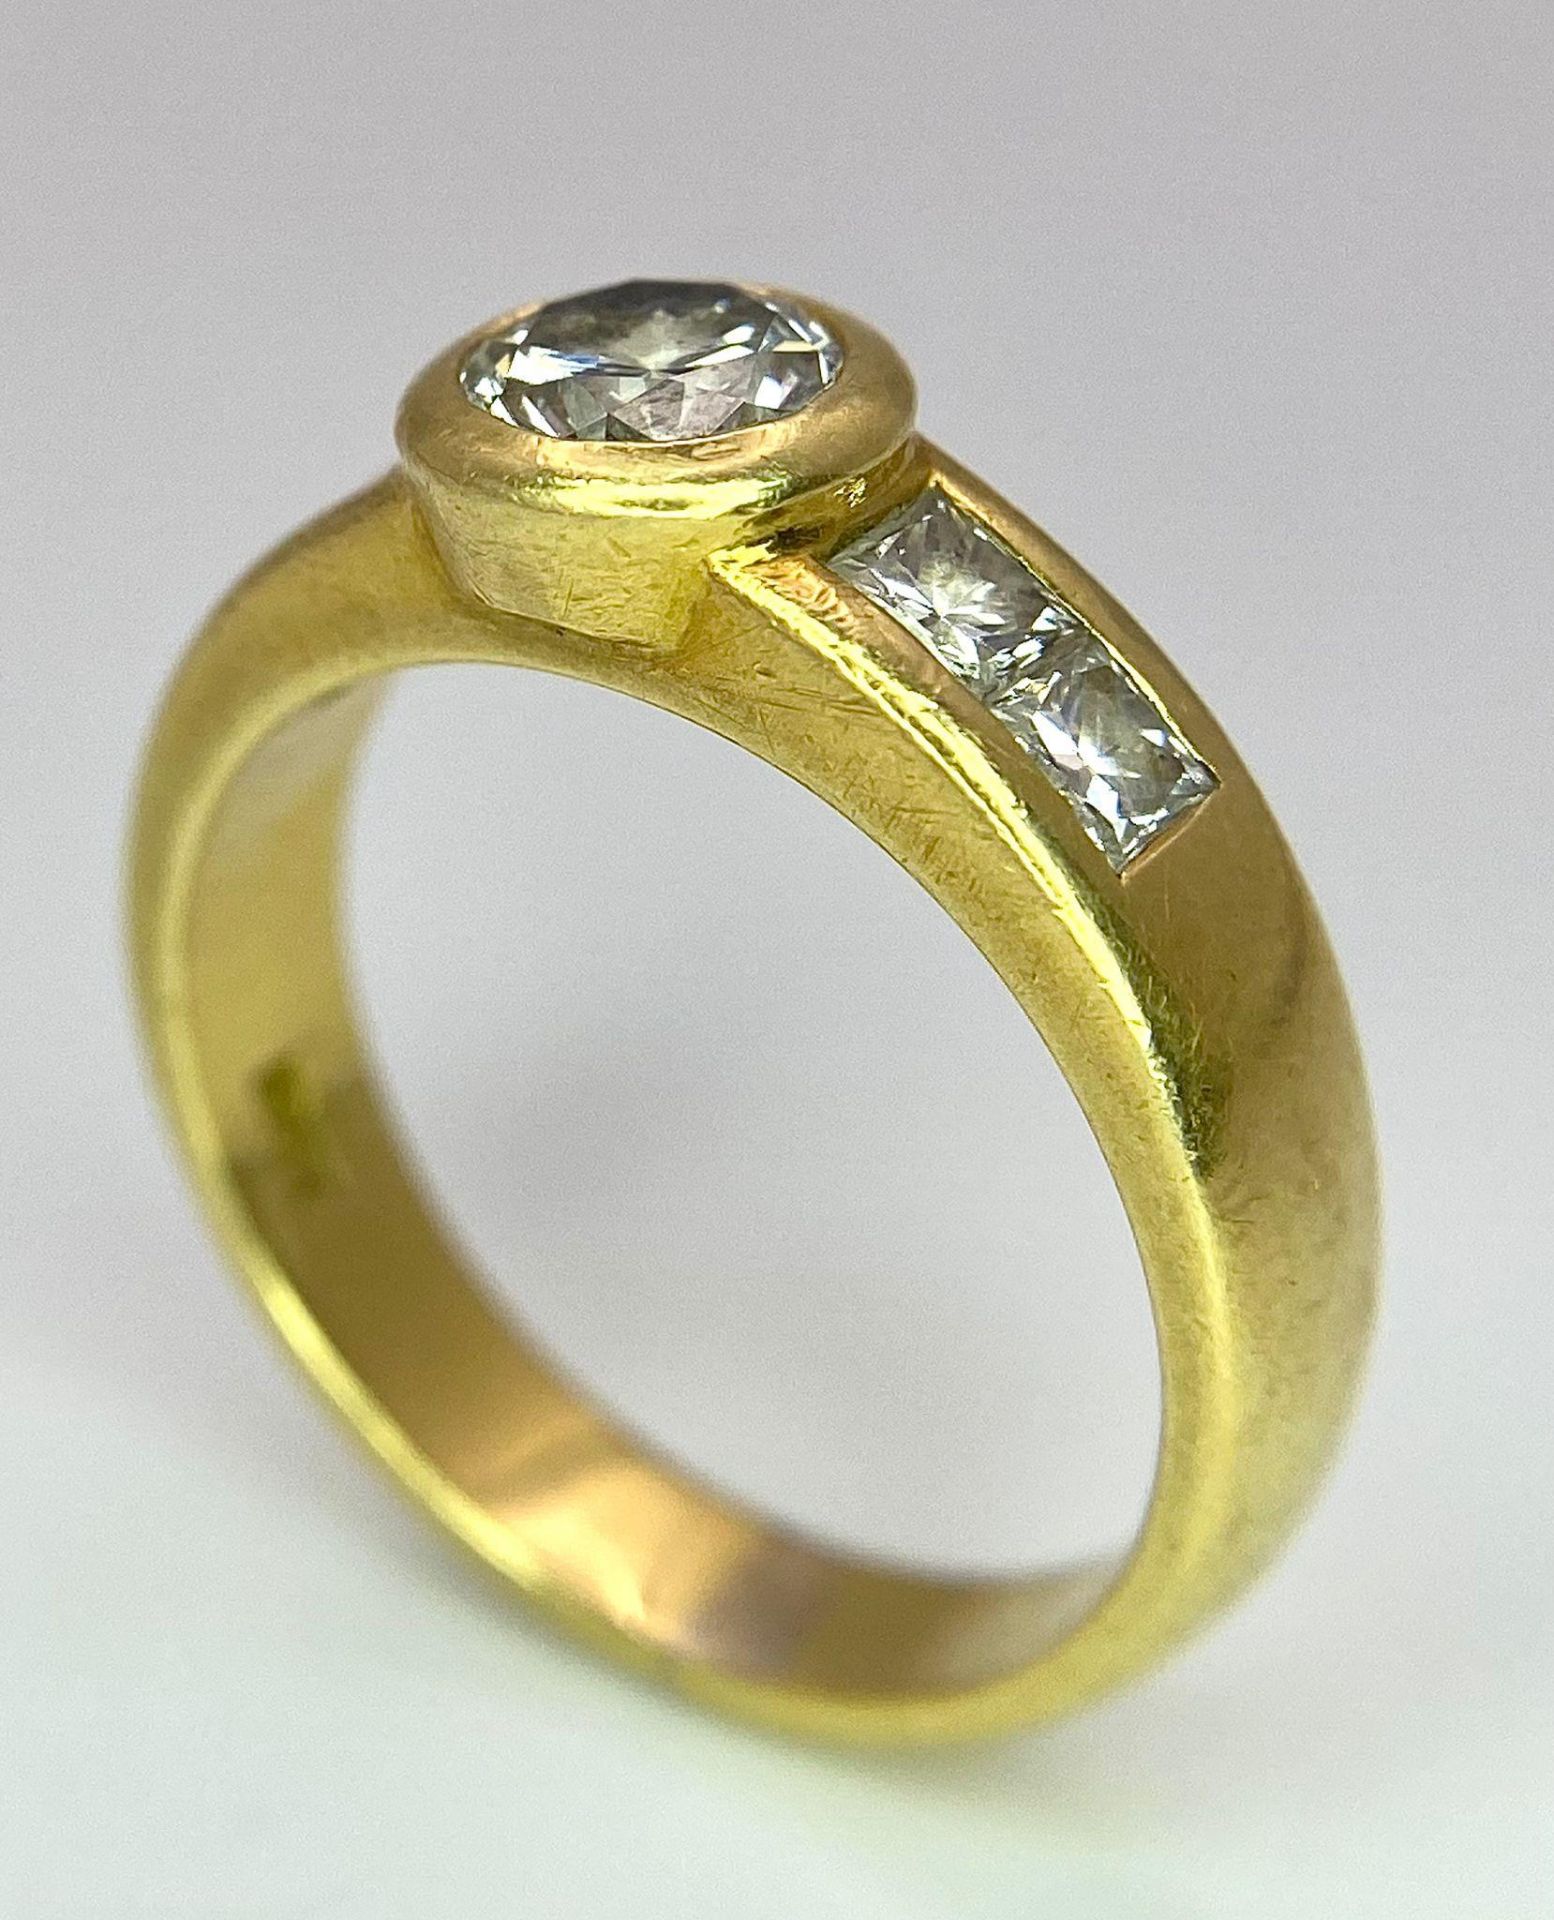 An 18K Yellow Gold Diamond Ring - Main 0.45ct bright white centre stone with 0.35ctw of diamond - Image 6 of 9